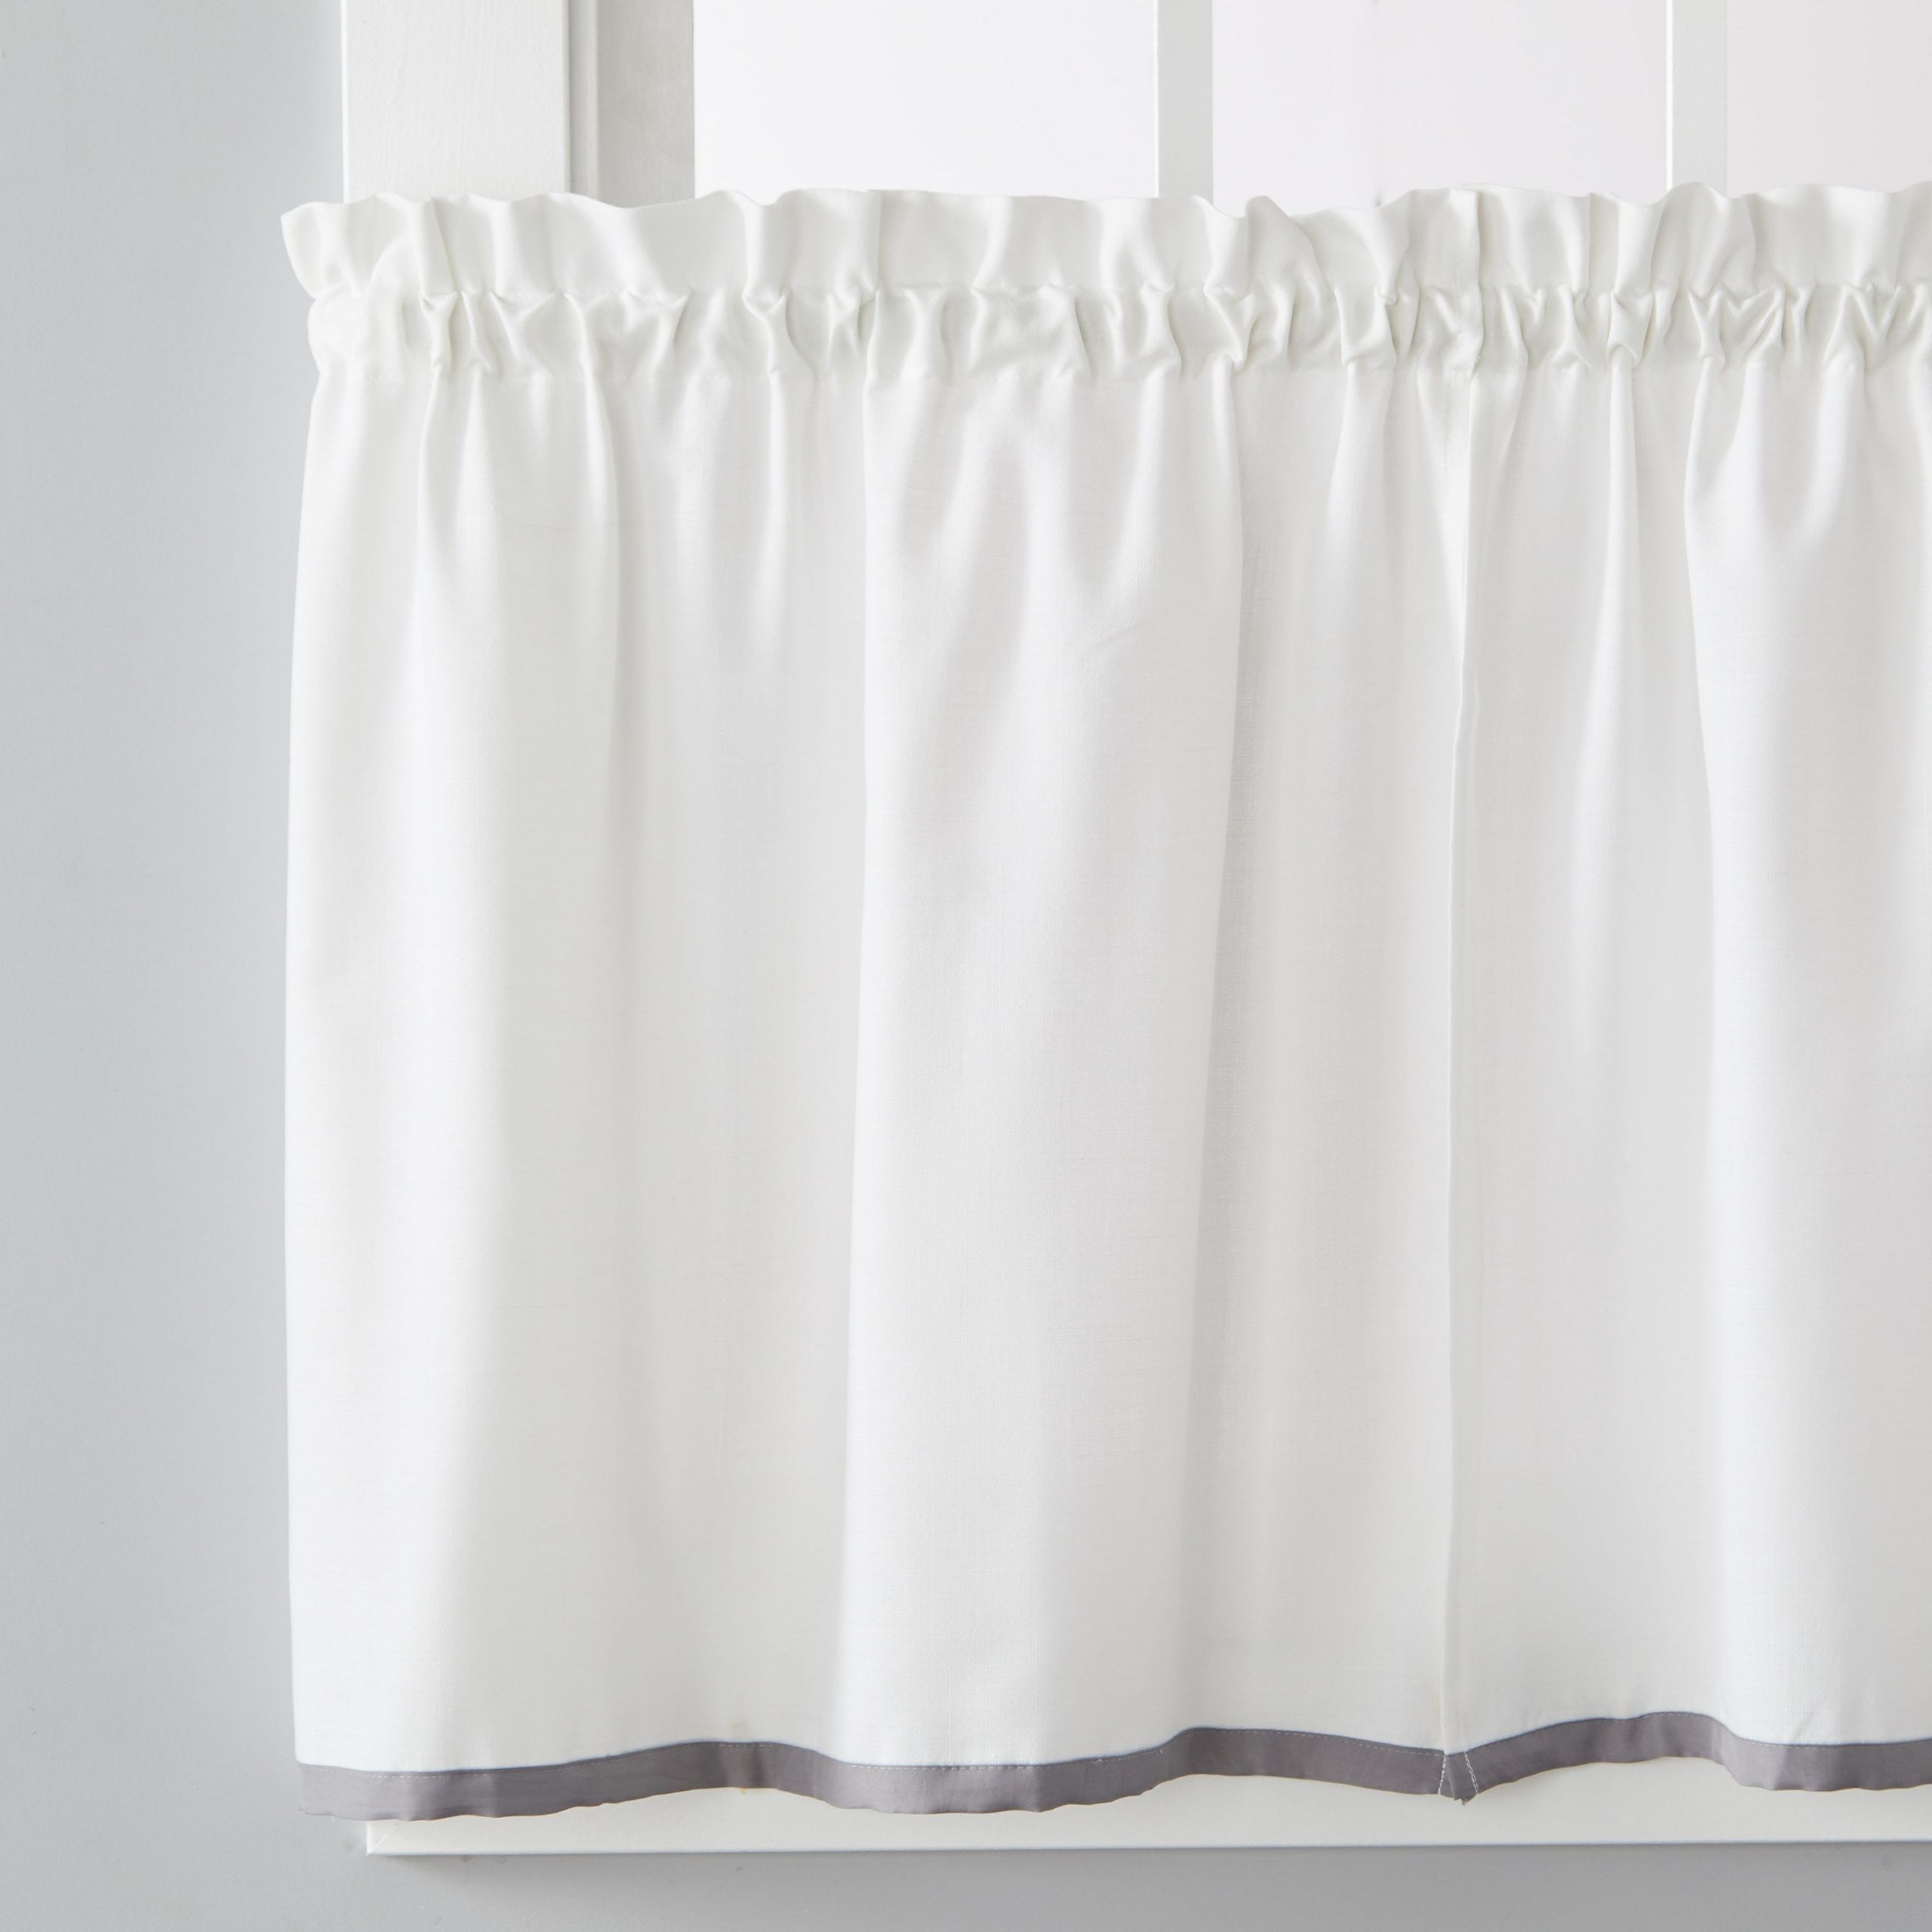 Skl Home Manor 24 Inch Tier Pair In Dove Gray Throughout Dove Gray Curtain Tier Pairs (View 4 of 20)